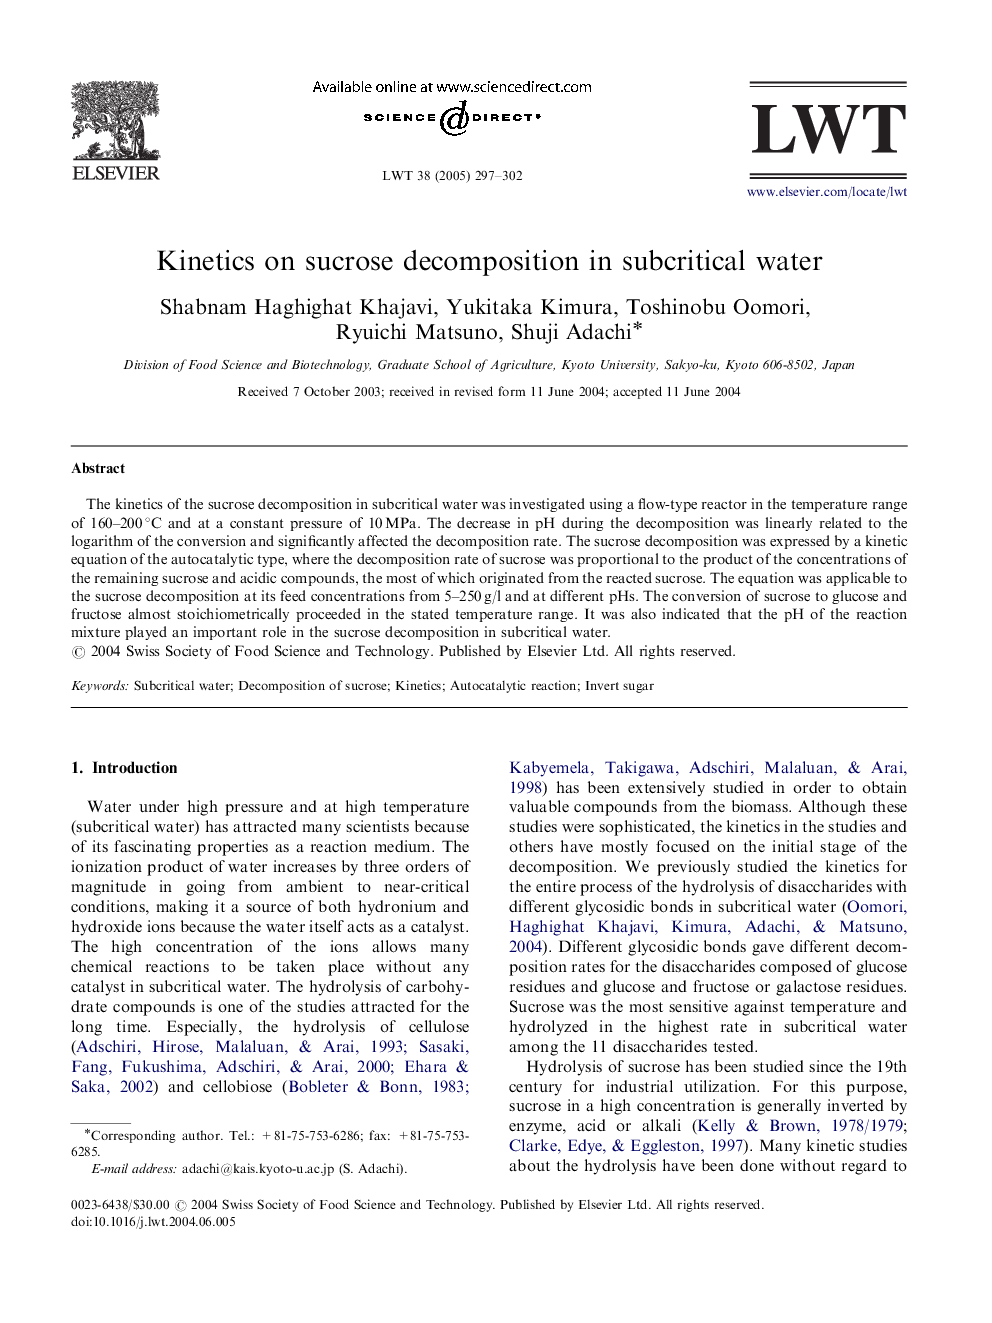 Kinetics on sucrose decomposition in subcritical water